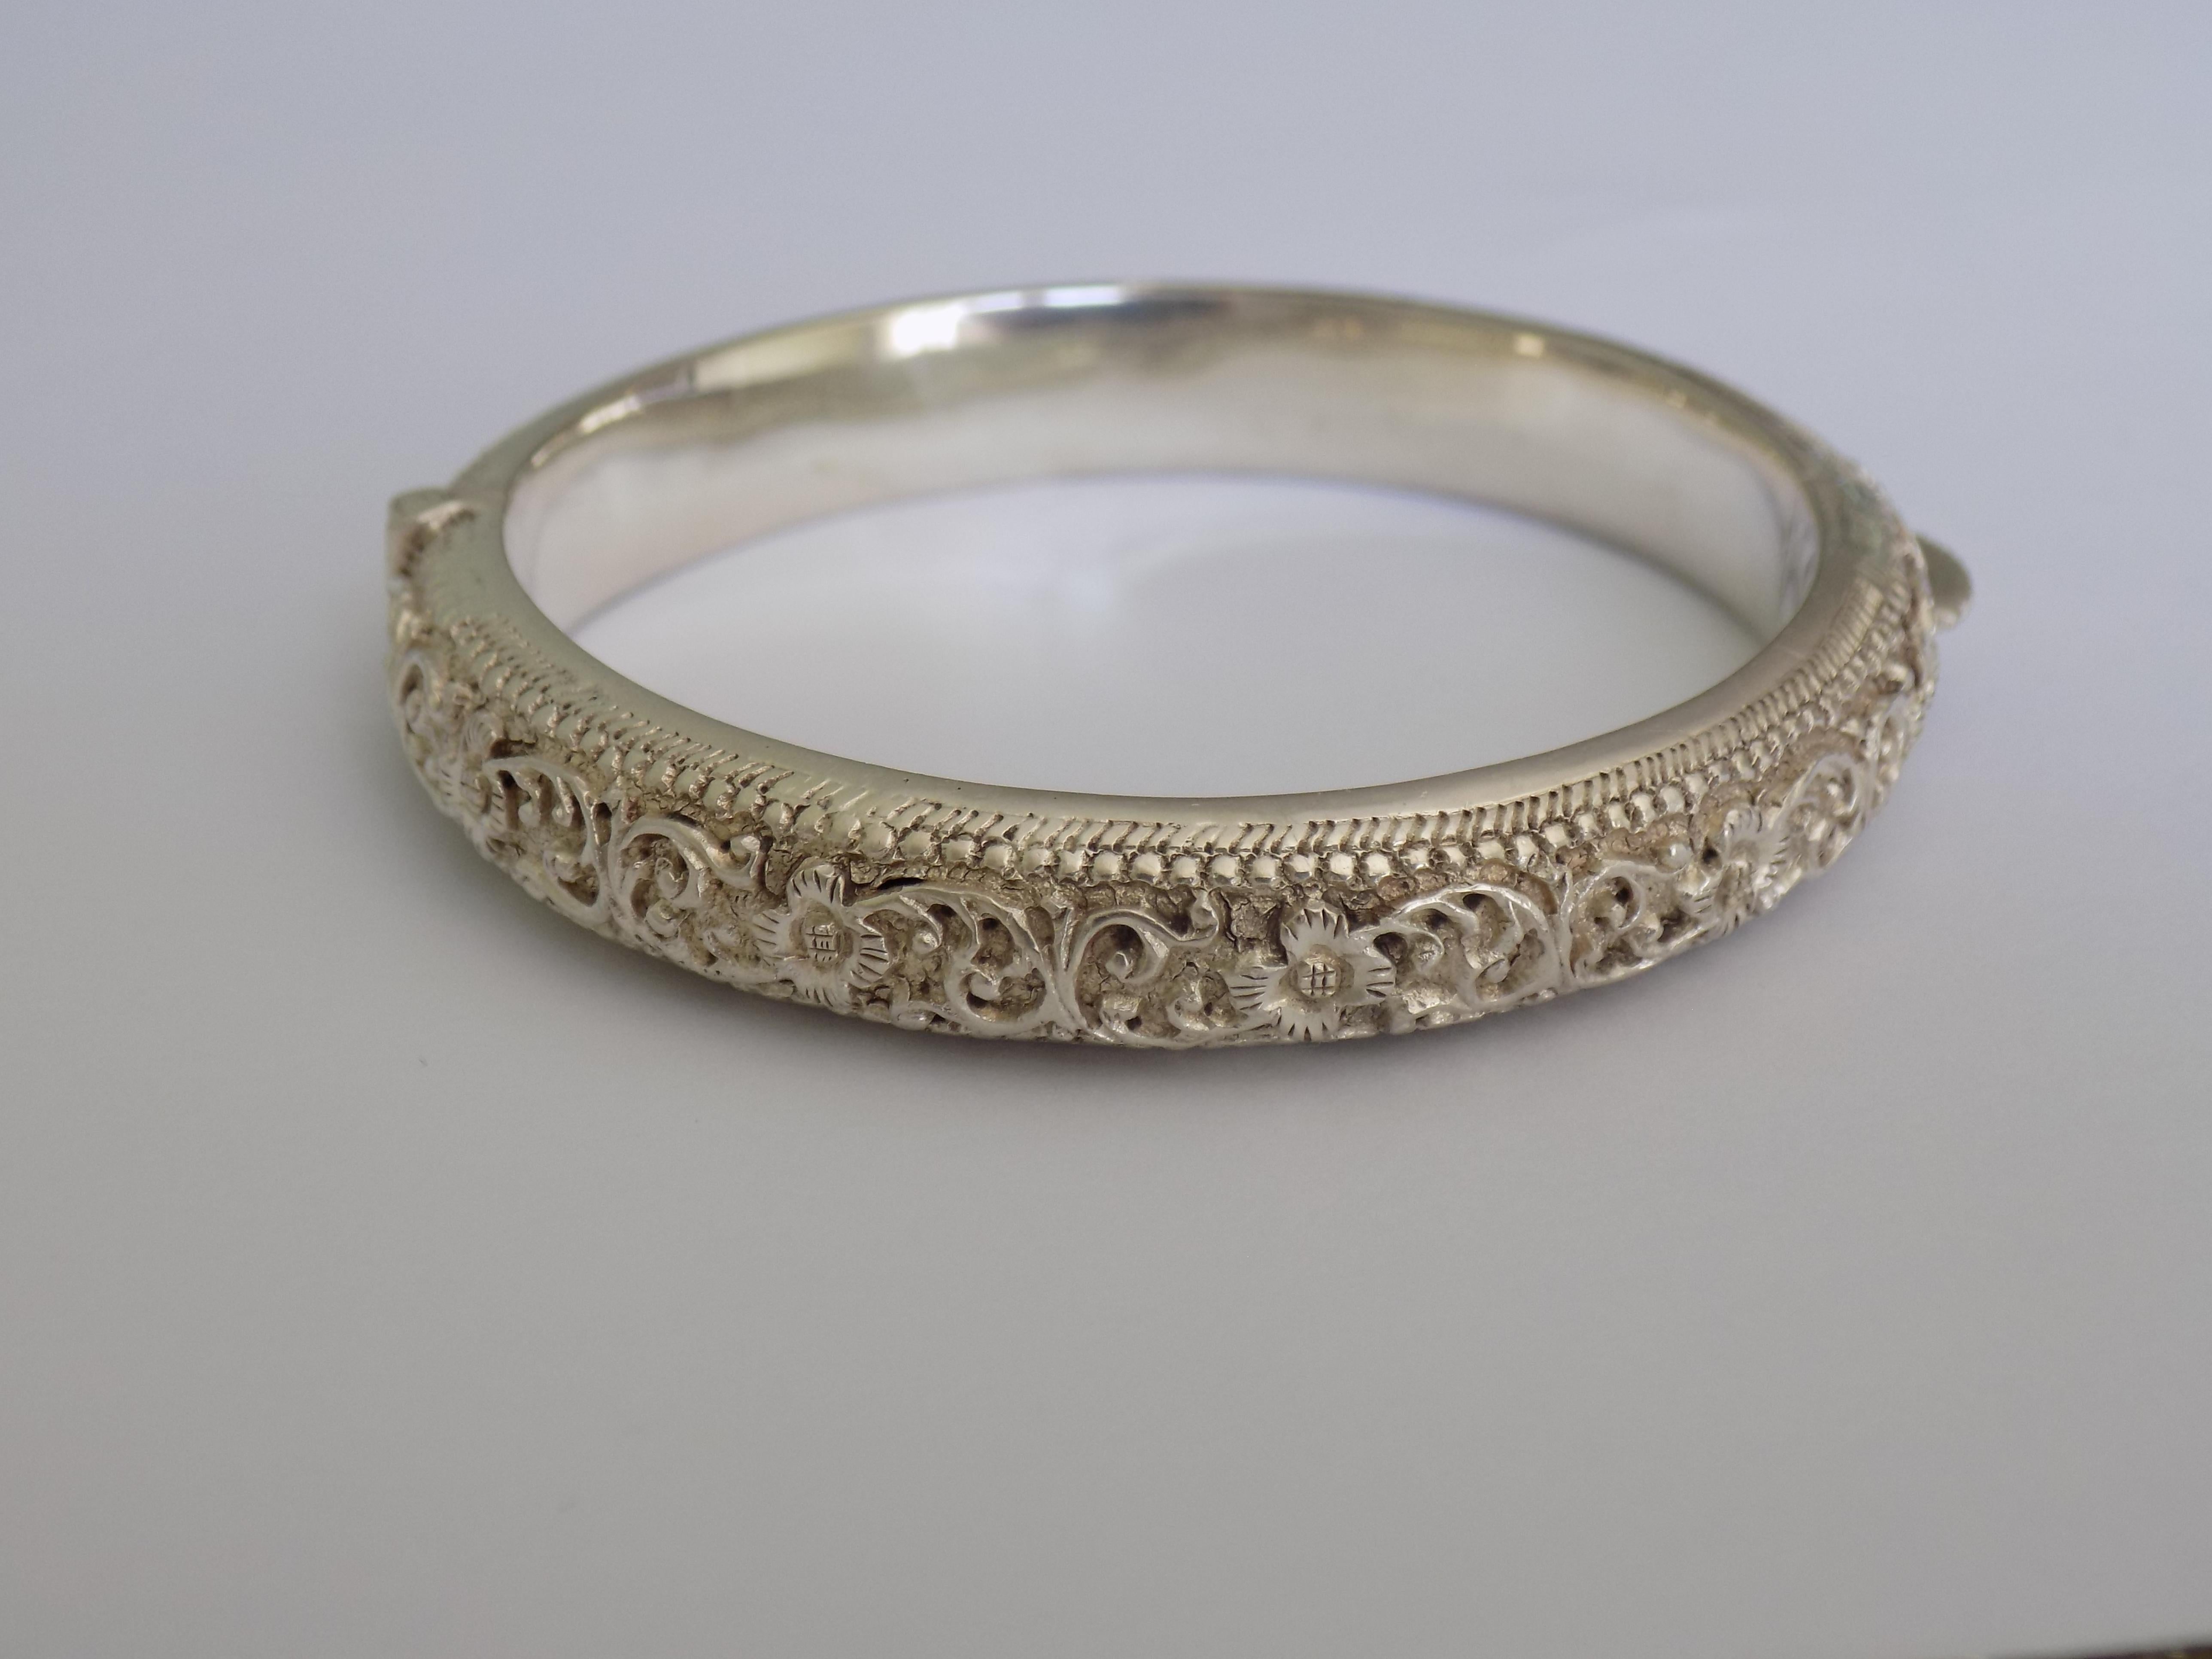 A Lovely Antique Victorian solid Silver Floral repousse bangle for child. The bangle with engraved initials M.A.D. The bangle well made.
Width 9mm.
Diameter inside of the bangle 49mm,
Unmarked, tested positive for Silver.
The bangle in good